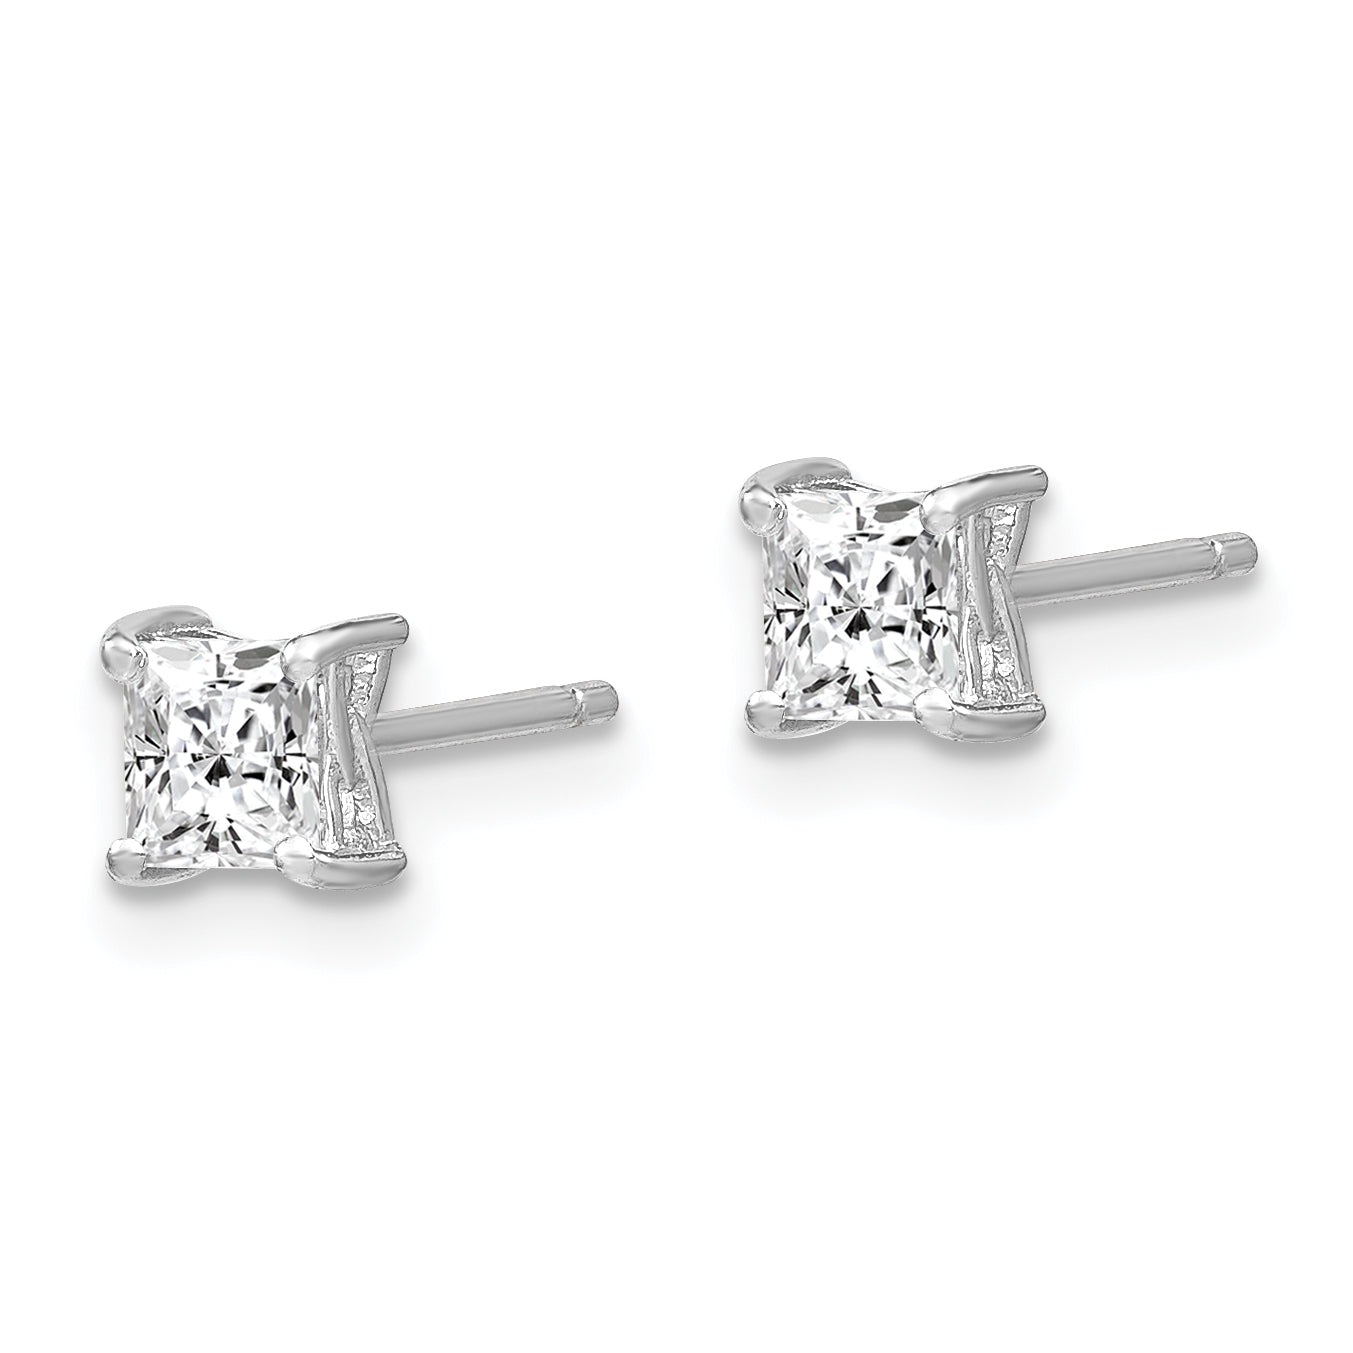 Sterling Silver Rhodium-plated 4mm Princess White Topaz Post Earrings